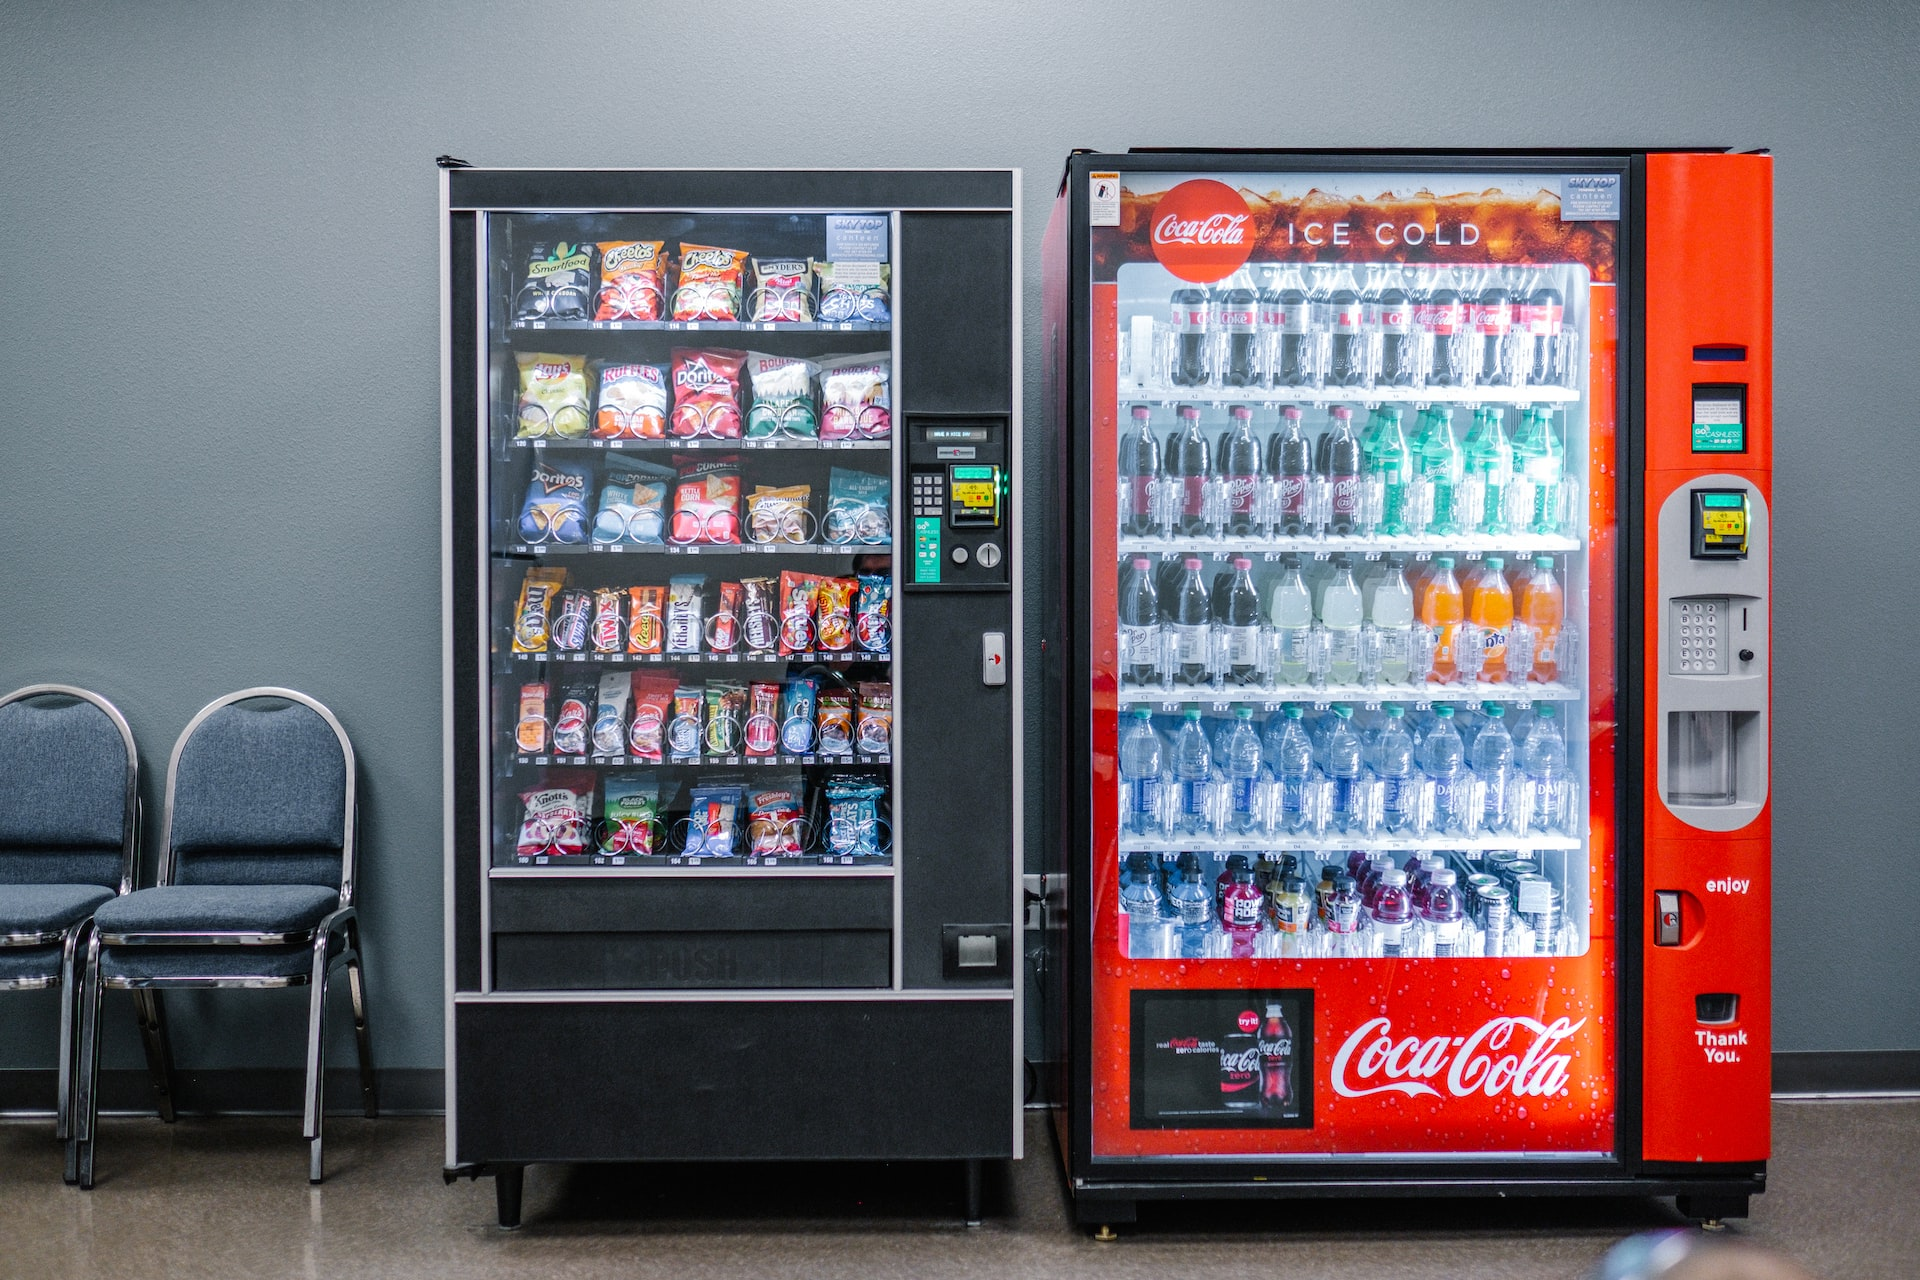 Food and beverage vending machine business